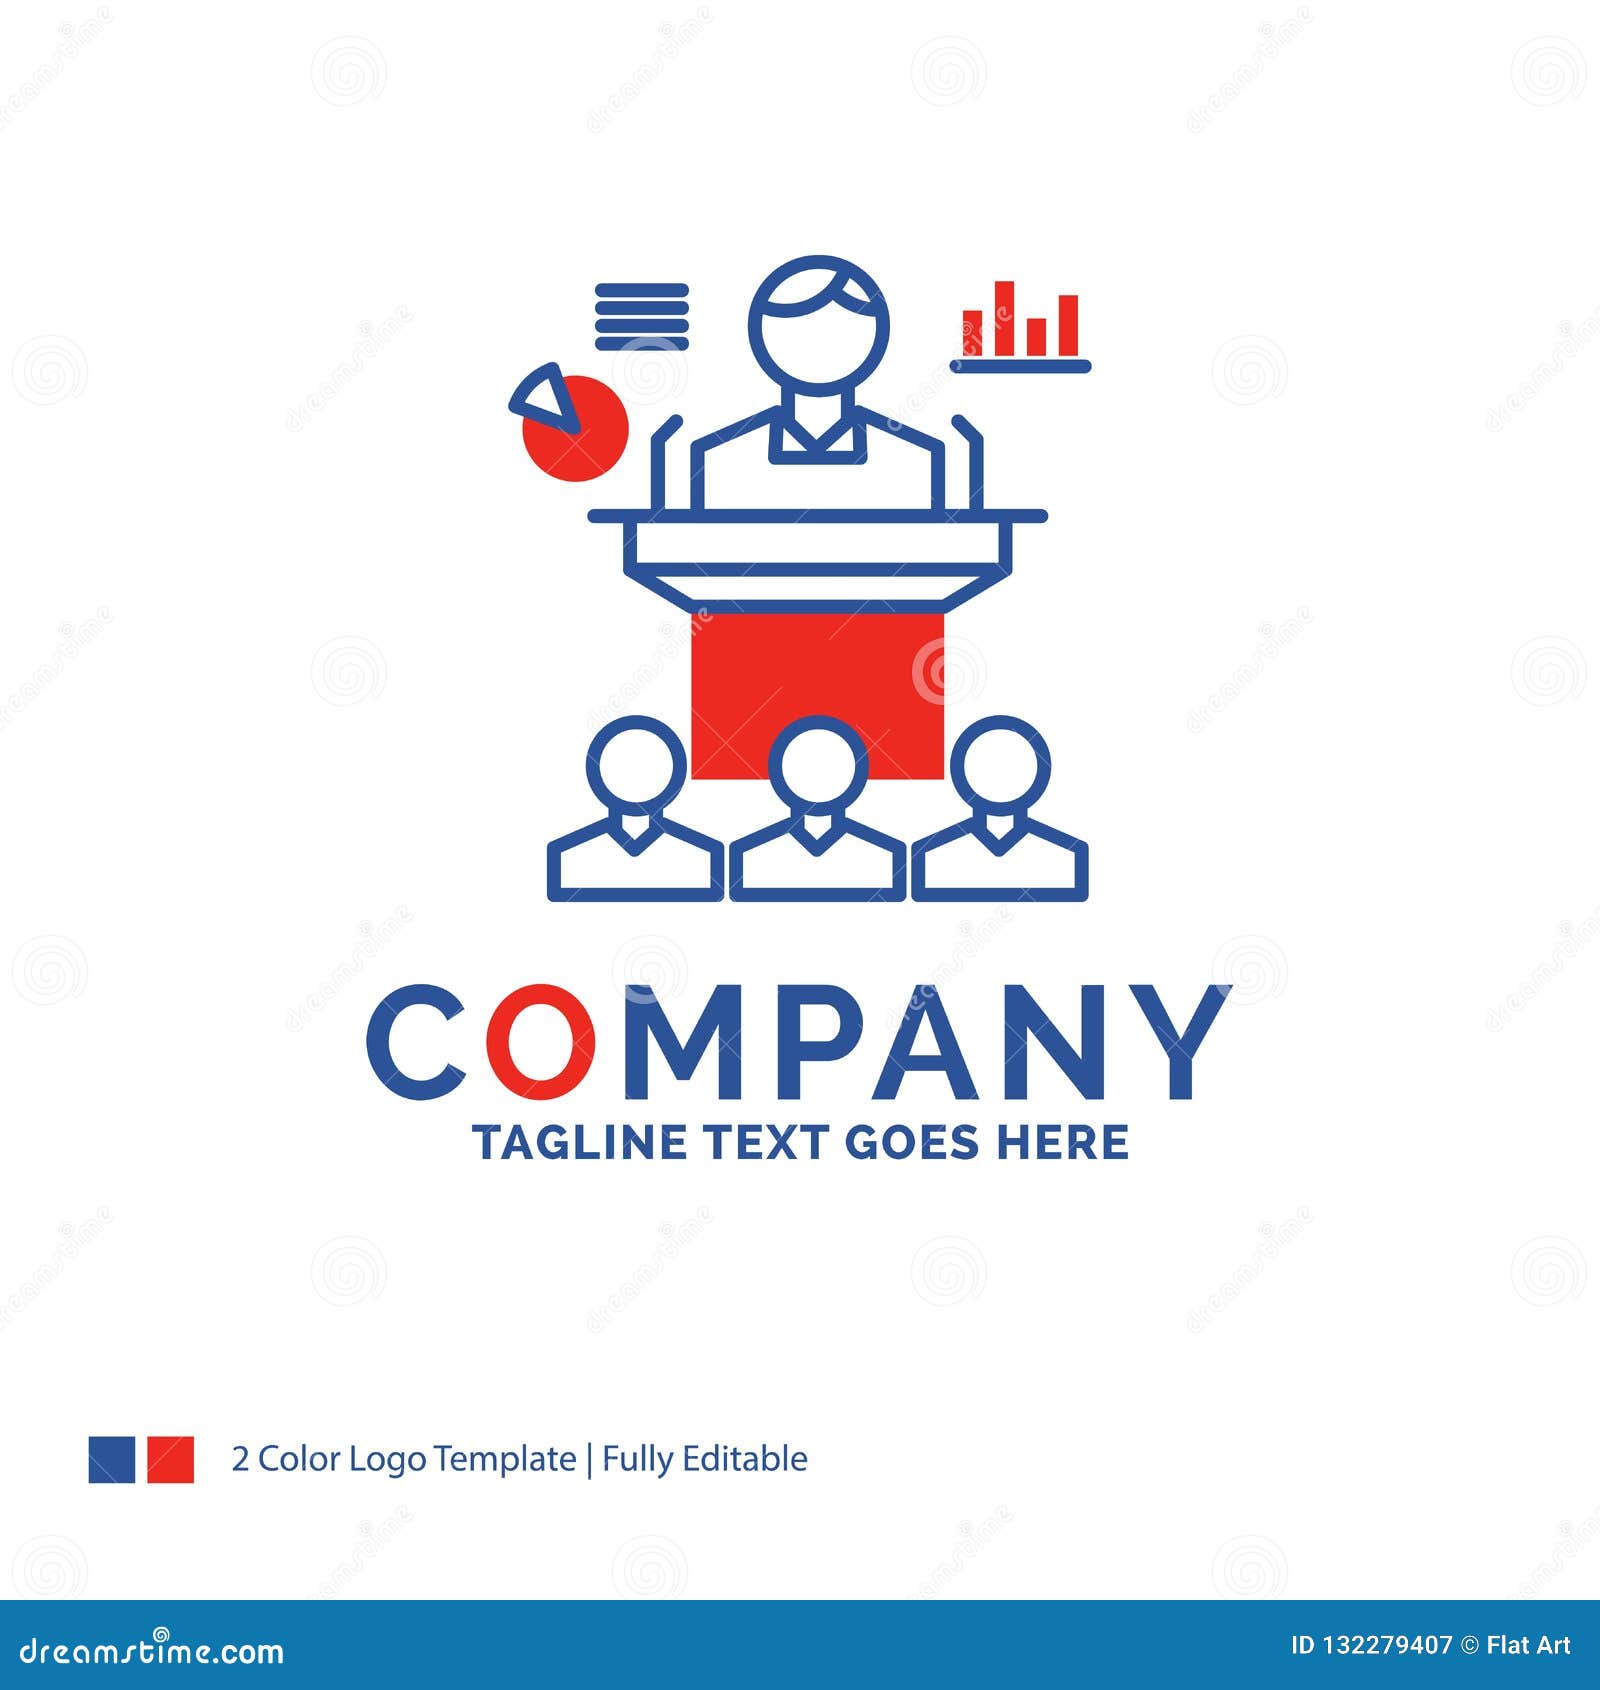 Company Name Logo Design For Business Conference Convention P